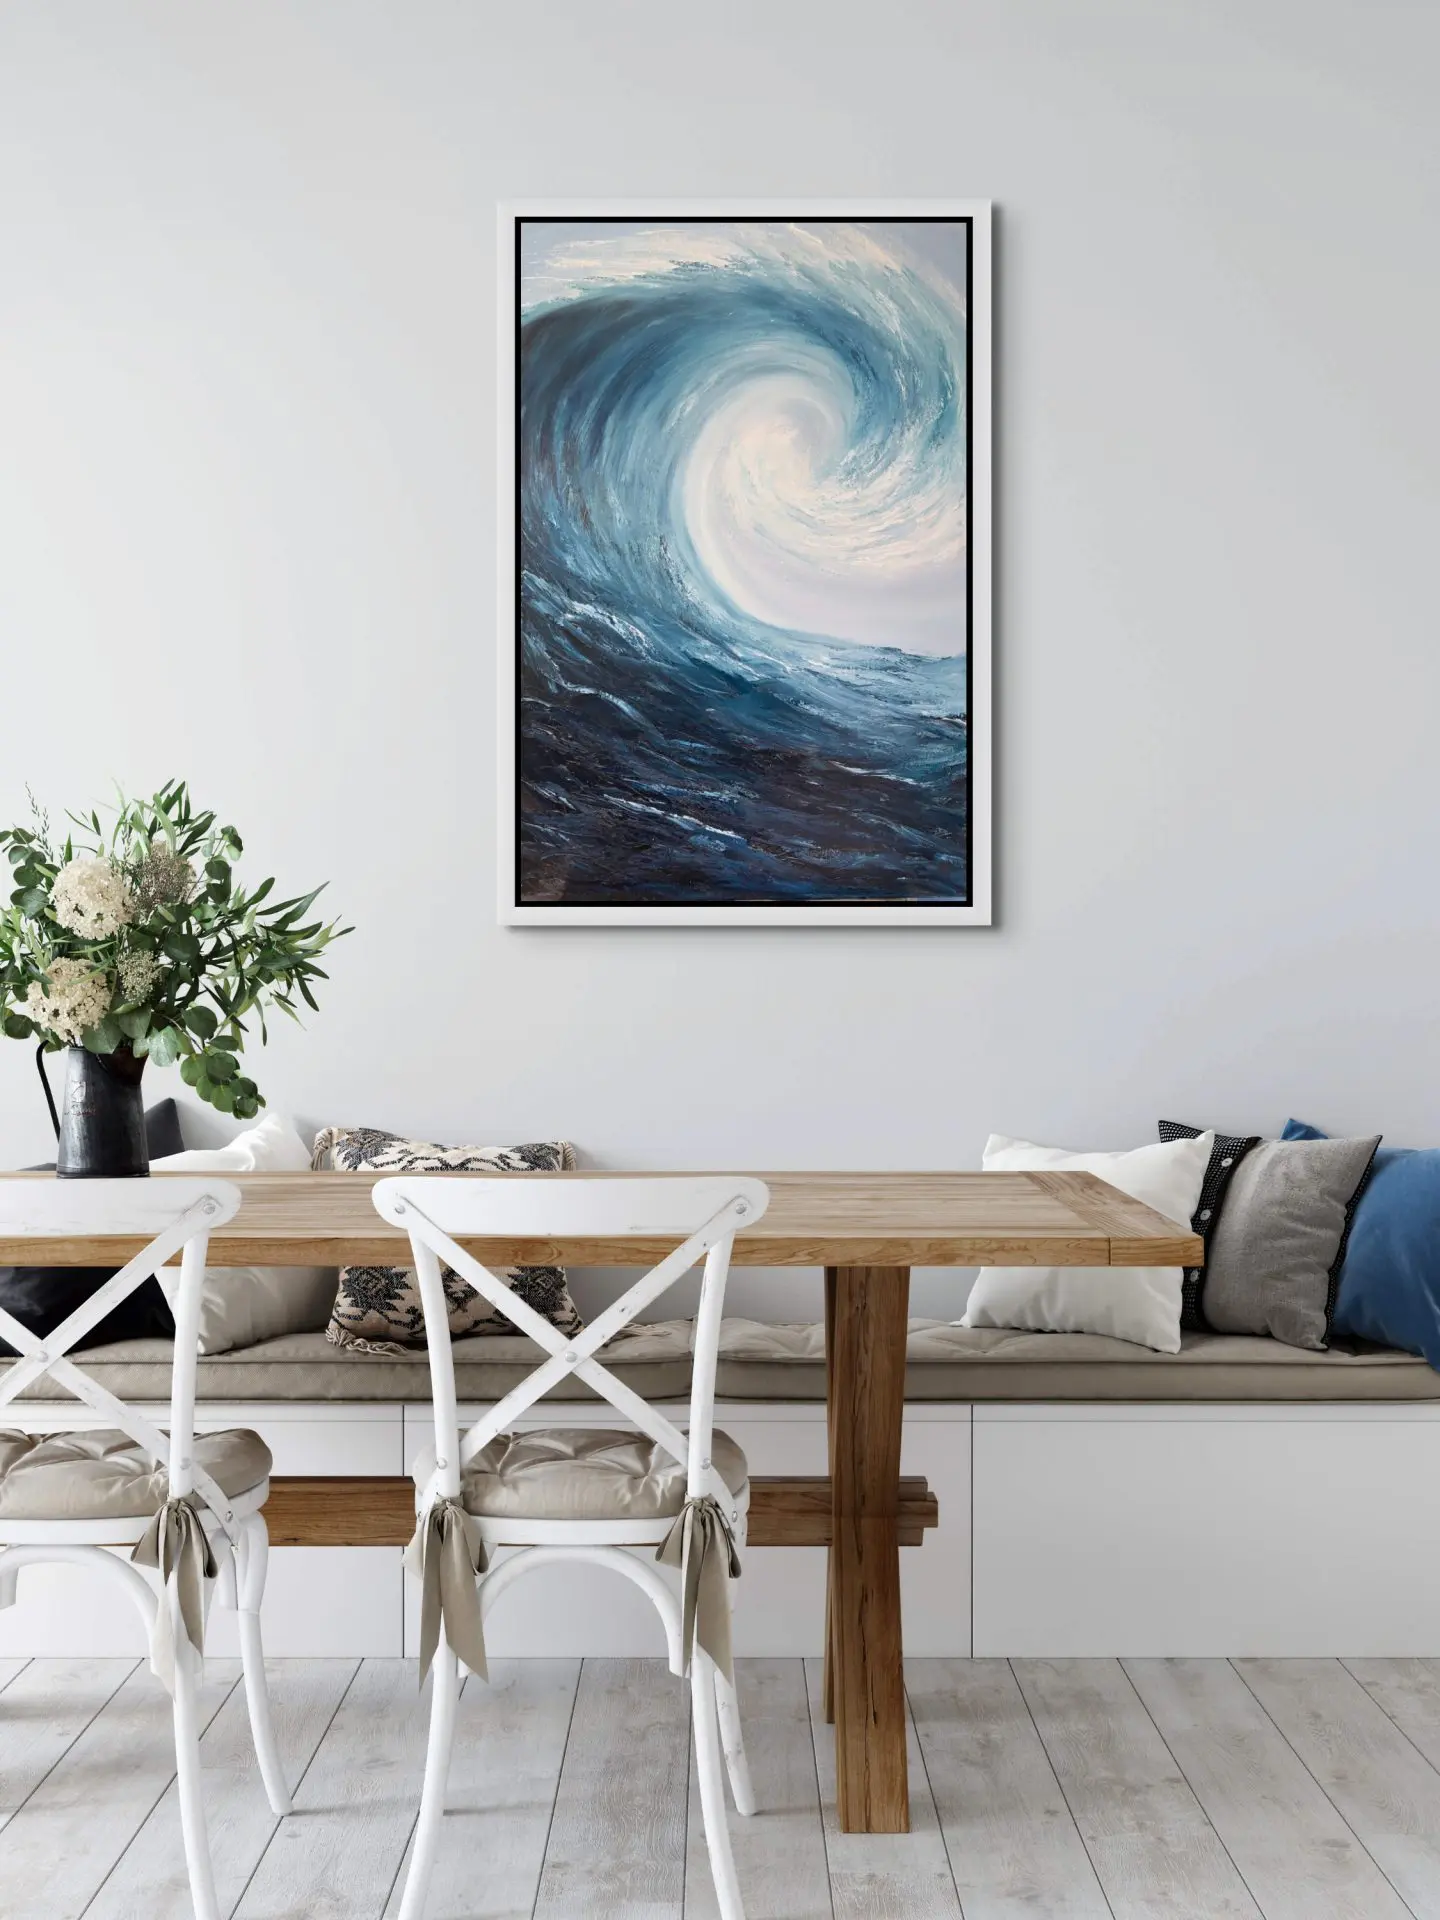 Surf seascape painting in a room setting